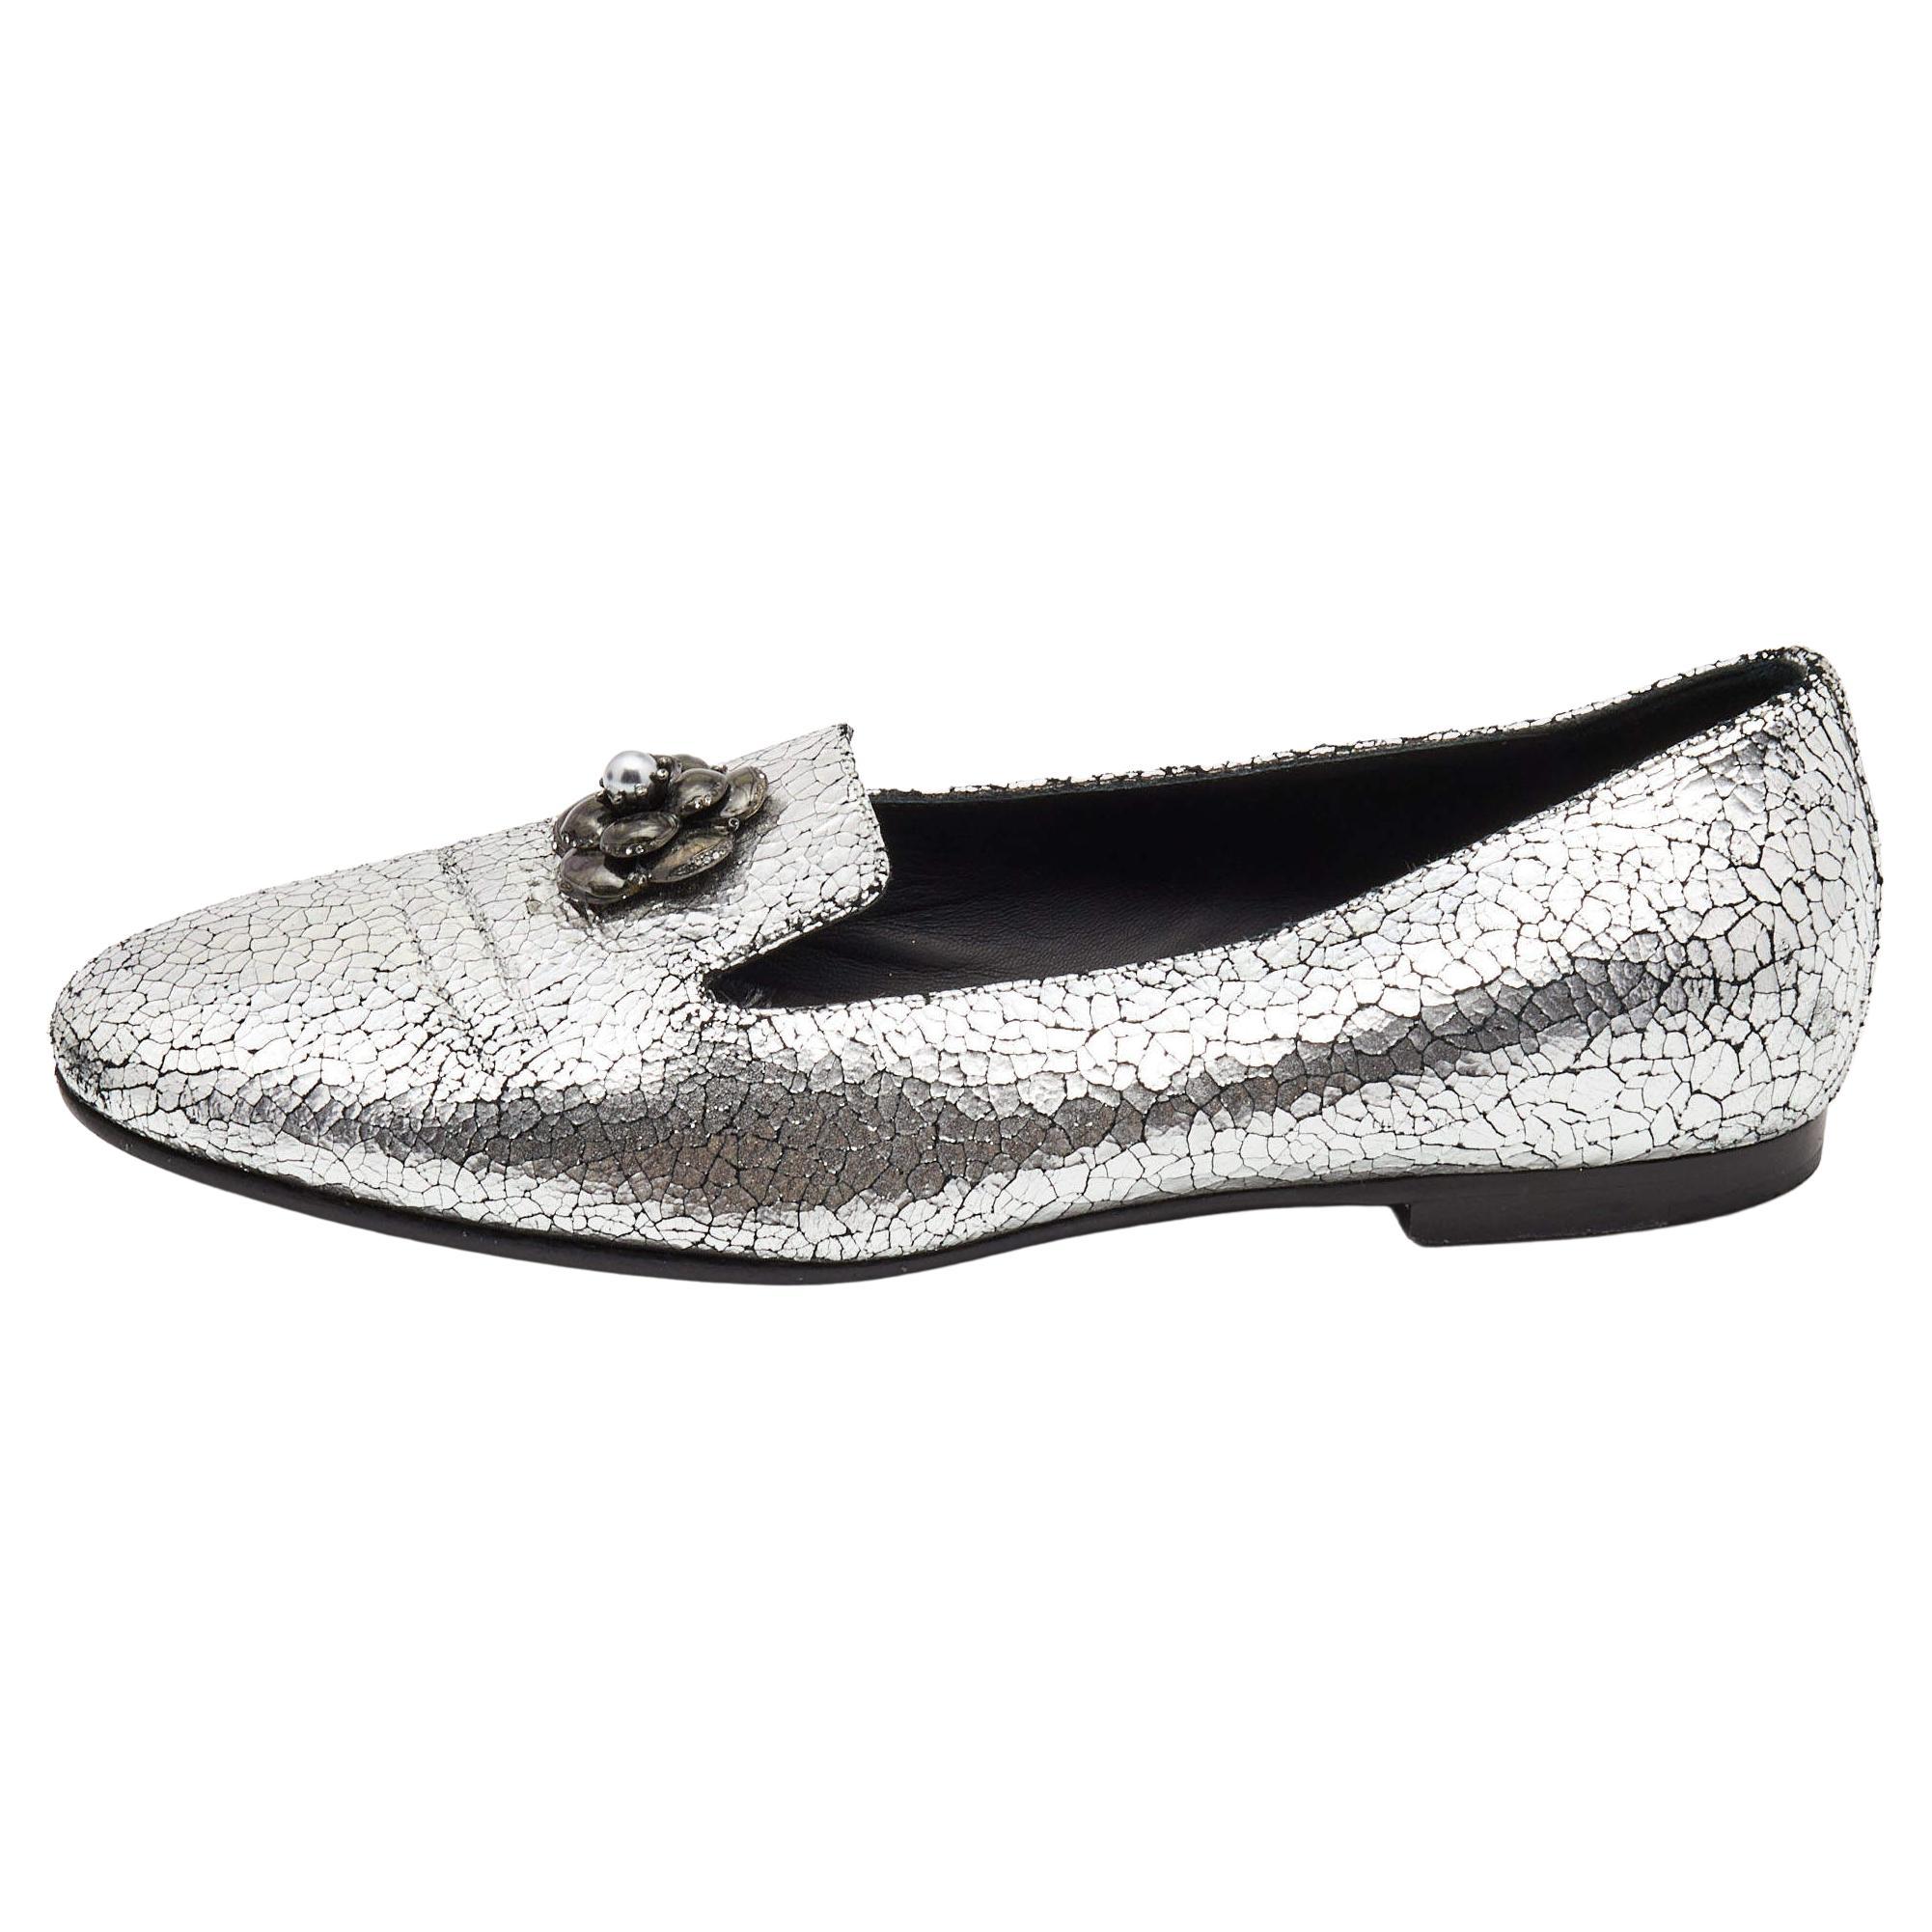 Chanel Silver Crackled Leather Interlocking CC Camelia Smoking Slippers 